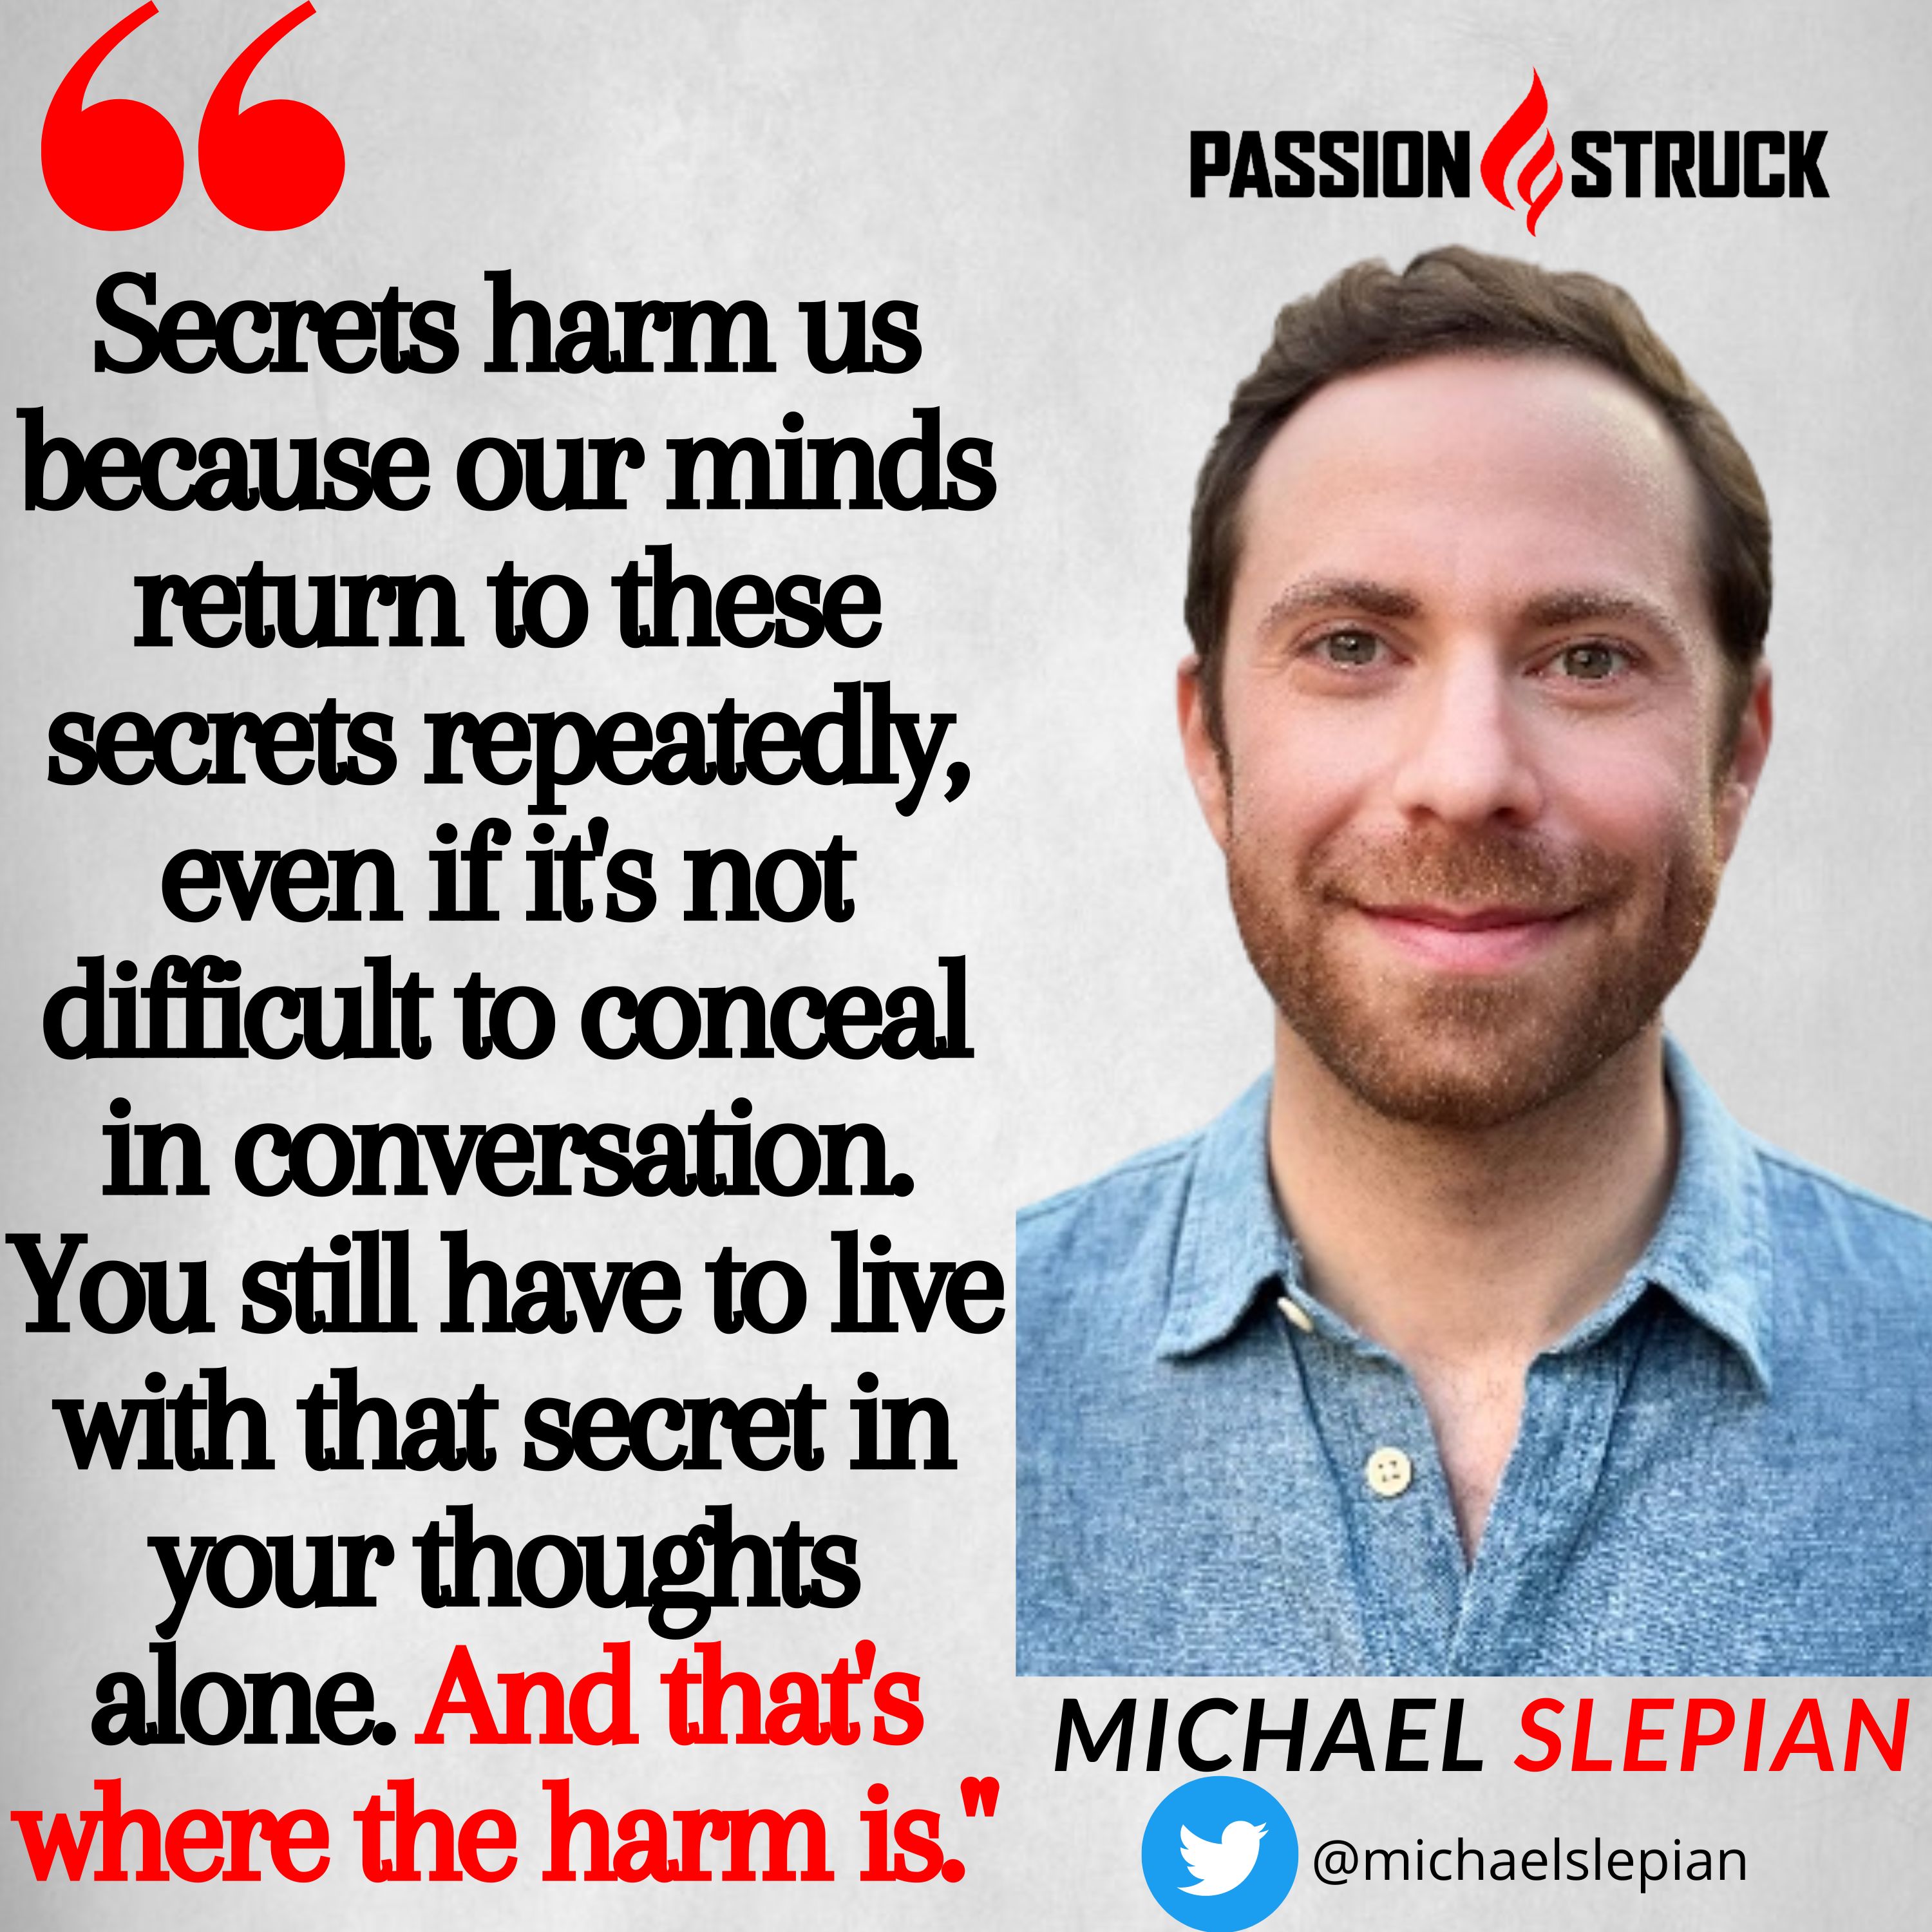 Michael Slepian quote from Passion Struck: Secrets harm us because our minds return to these secrets repeatedly, even if it's not difficult to conceal in conversation. You still have to live with that secret in your thoughts alone.